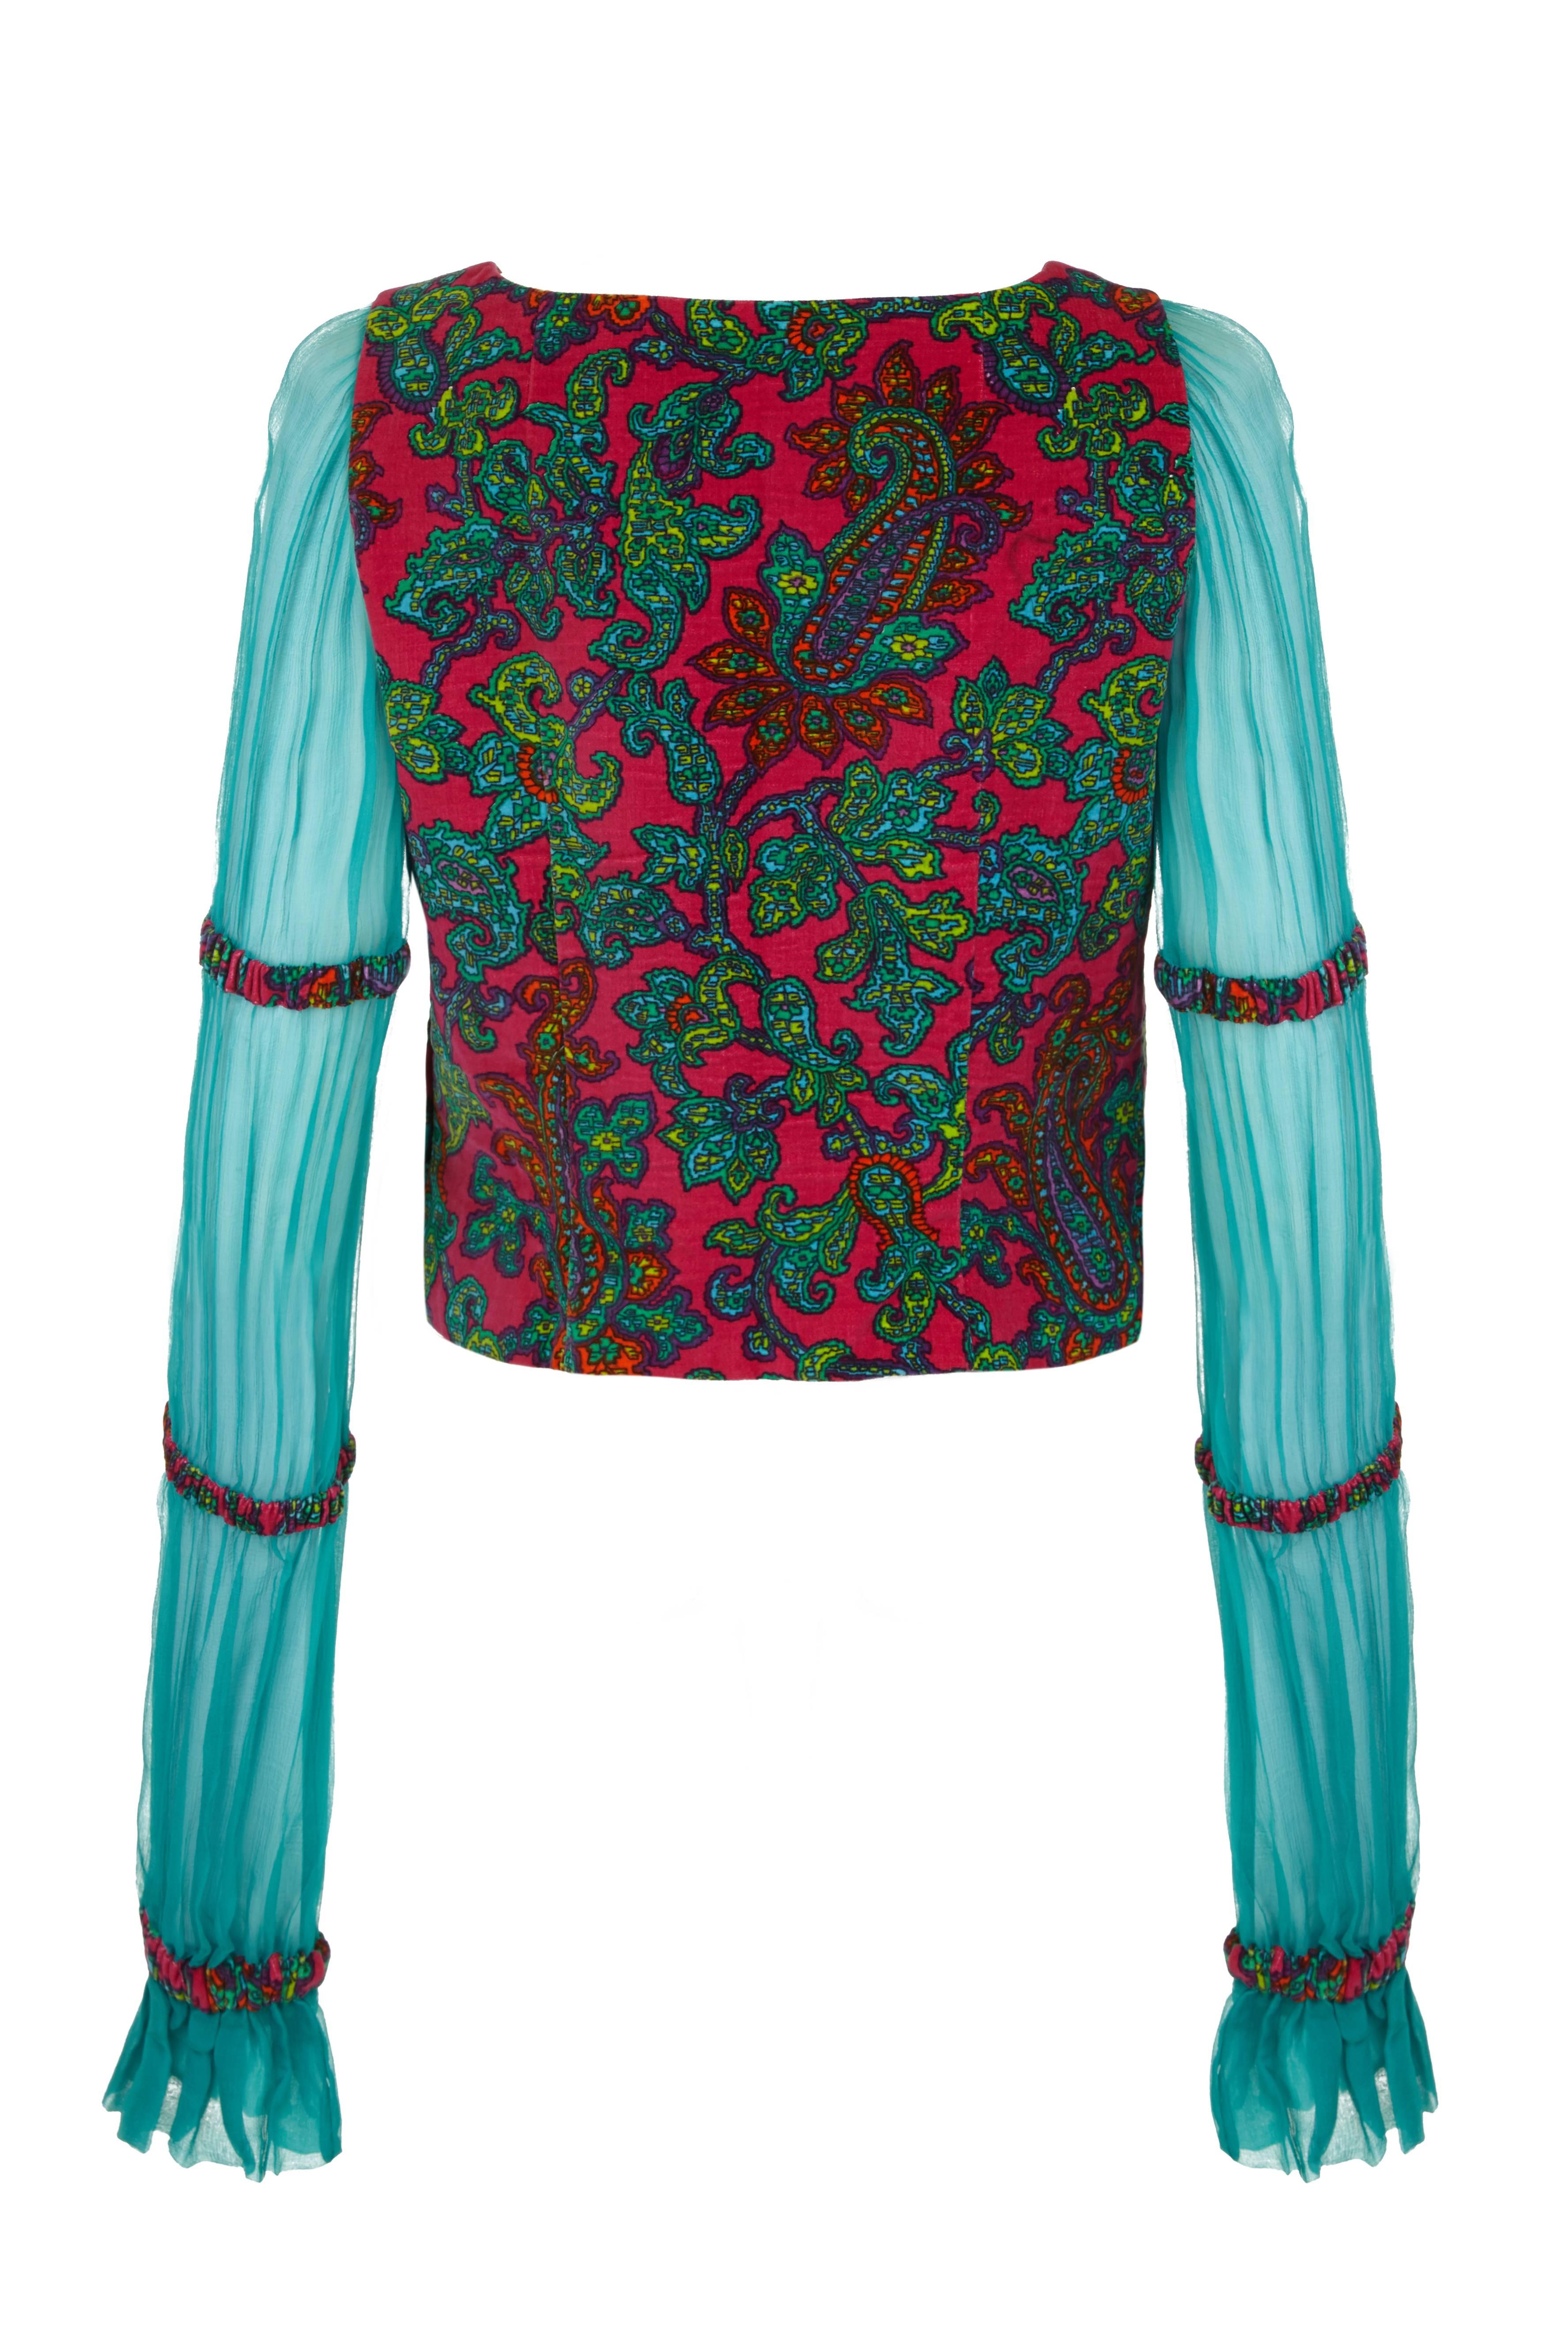 Fabulous vintage 1970s couture made velvet blouse with long chiffon sleeves.   This vibrant and unusual piece features a bright pink and green paisley print on the velvet bodice with coordinating turquoise chiffon sleeves in sections with